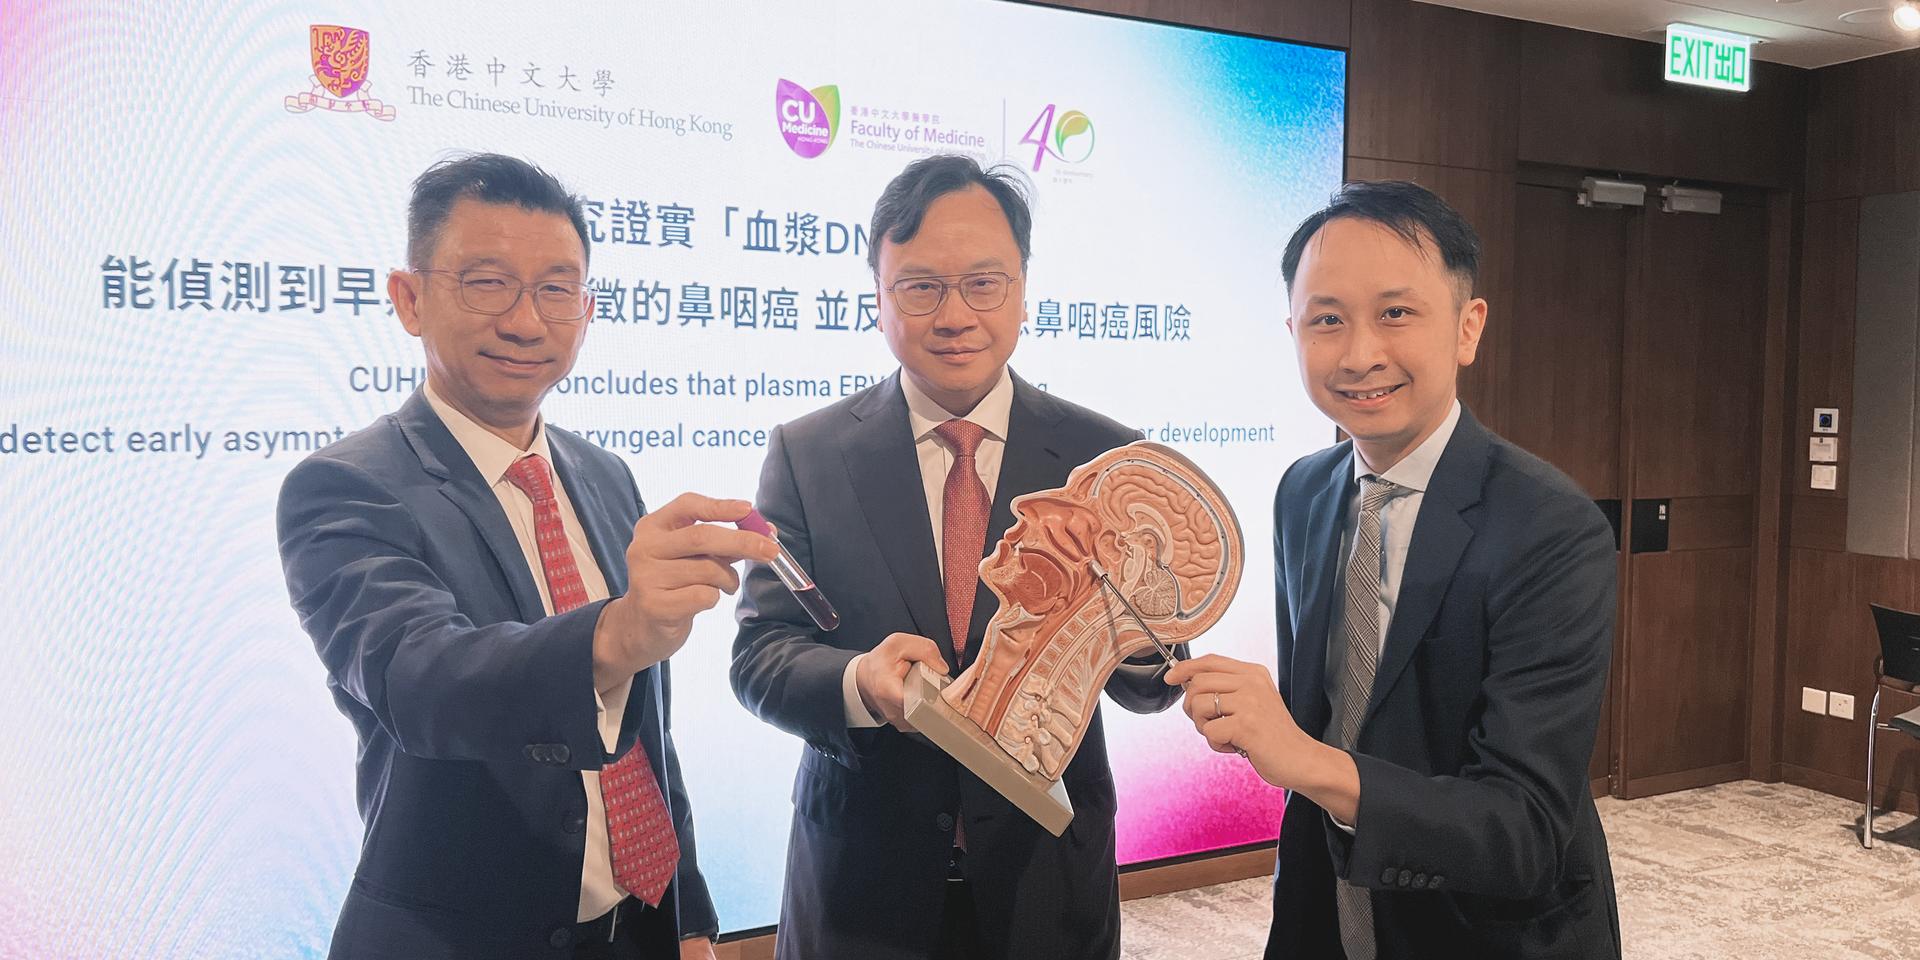 Nasopharyngeal Cancer Screening Results May “Predict” Development of Related Cancer and Improve Early Diagnosis, CUHK Study Finds